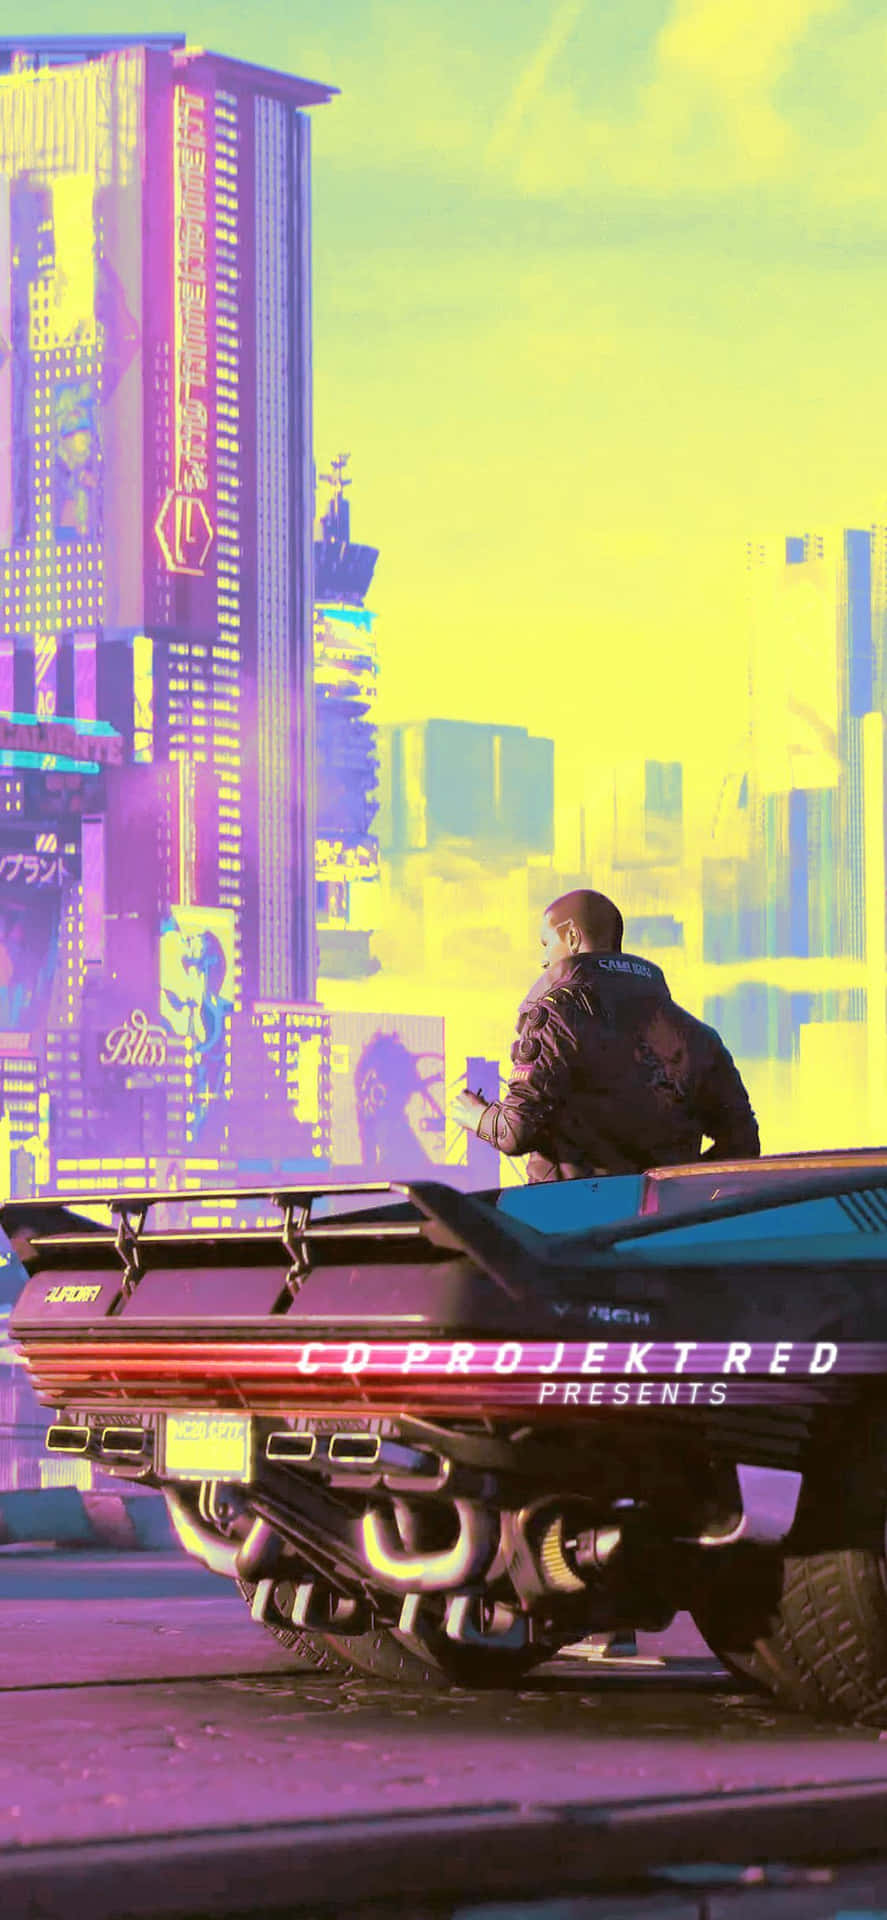 Iphone X Cyberpunk 2077 Background Oversaturated Effect